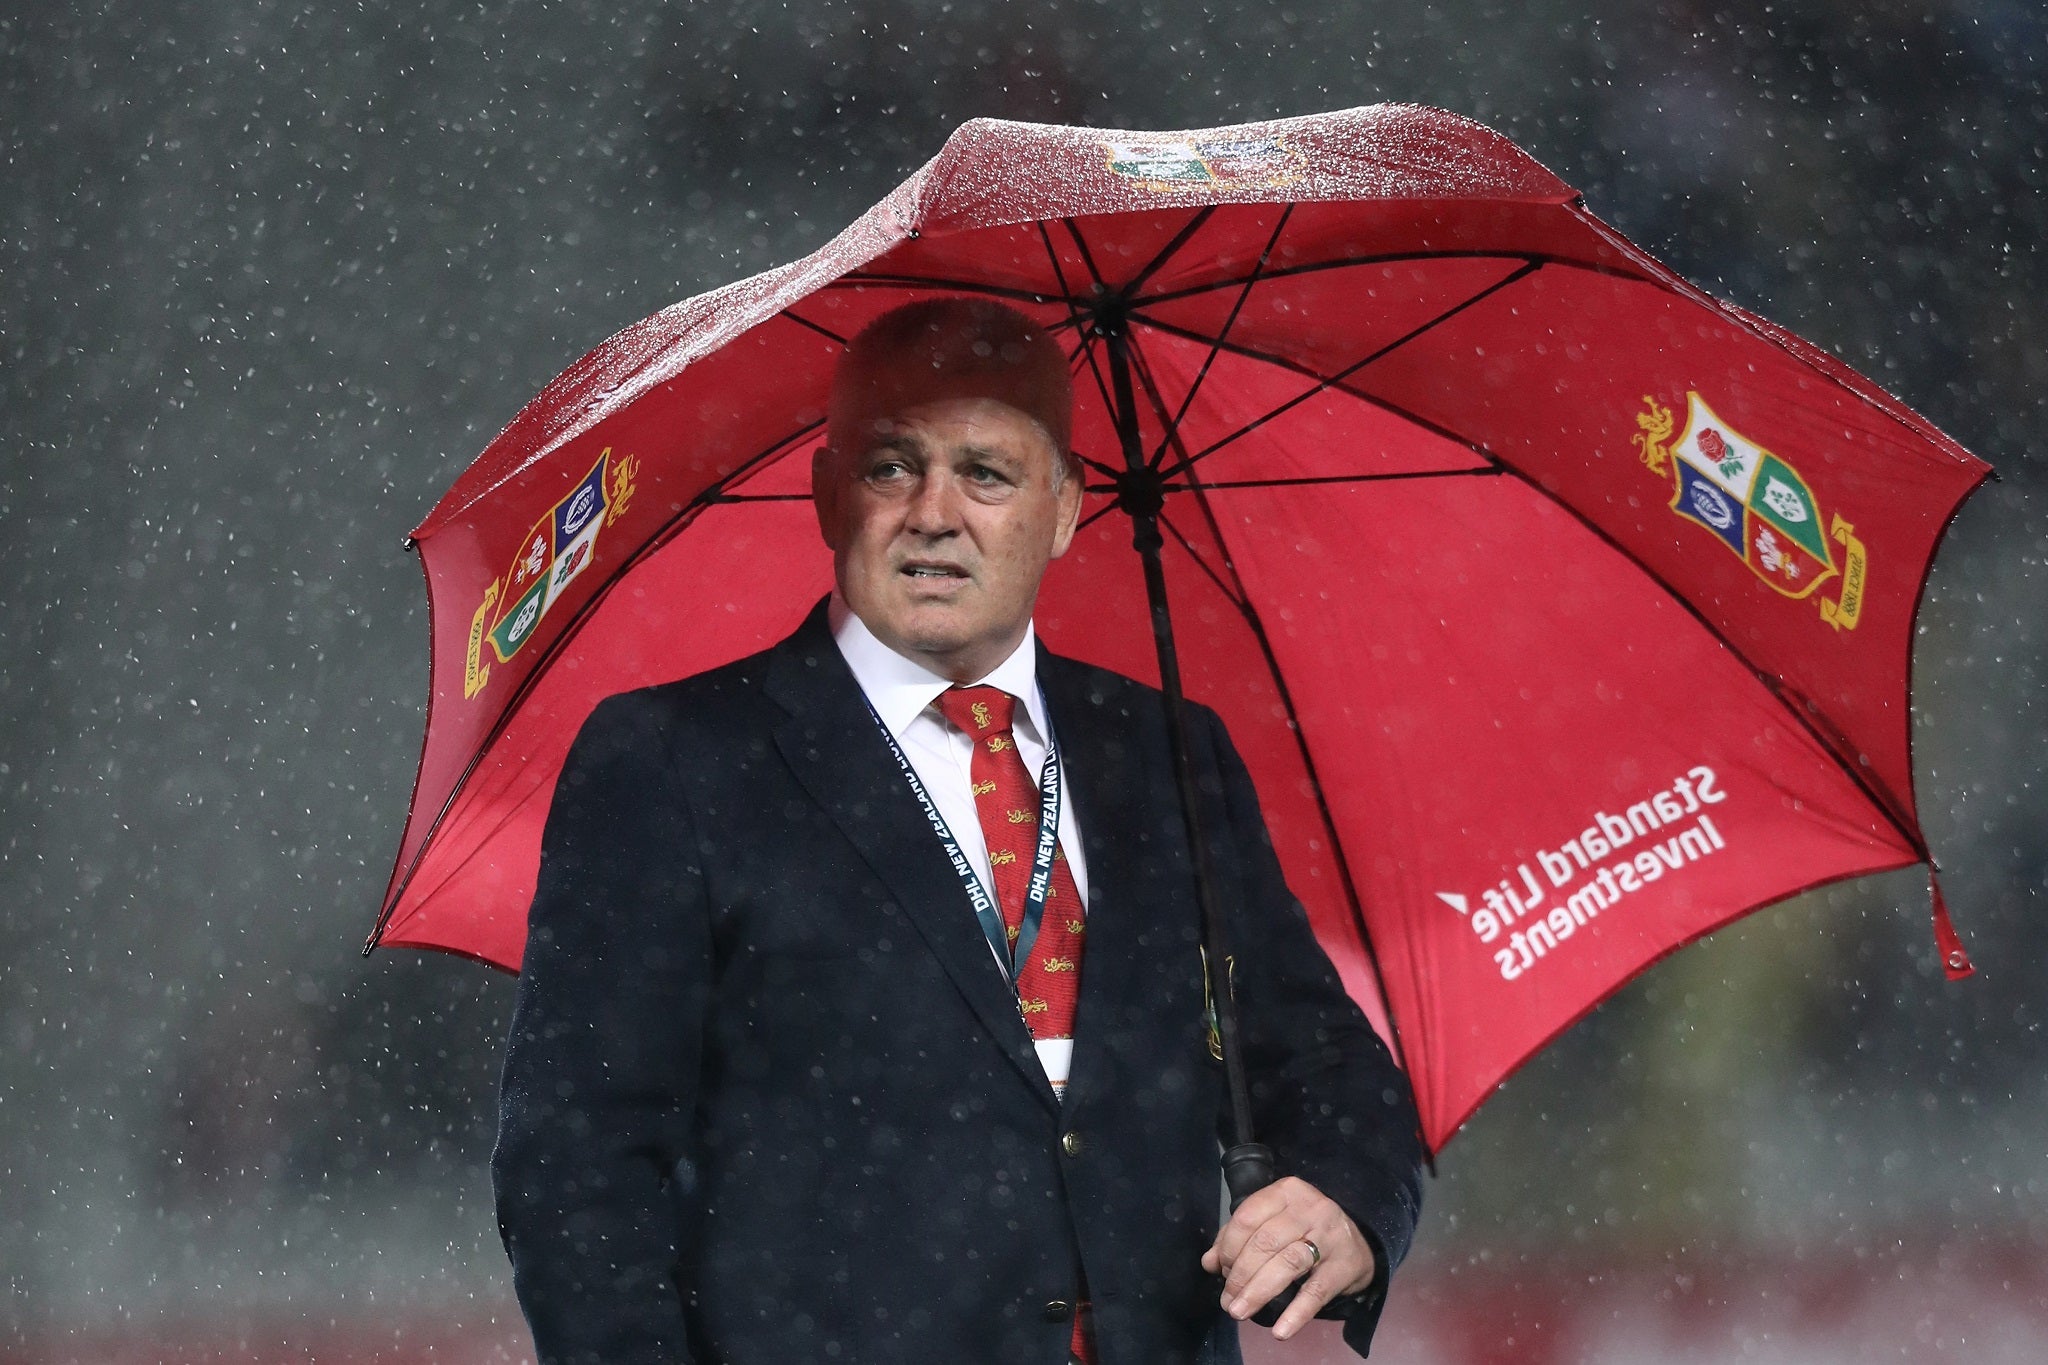 Warren Gatland looks on after the British and Irish Lions' 22-16 defeat by the Blues